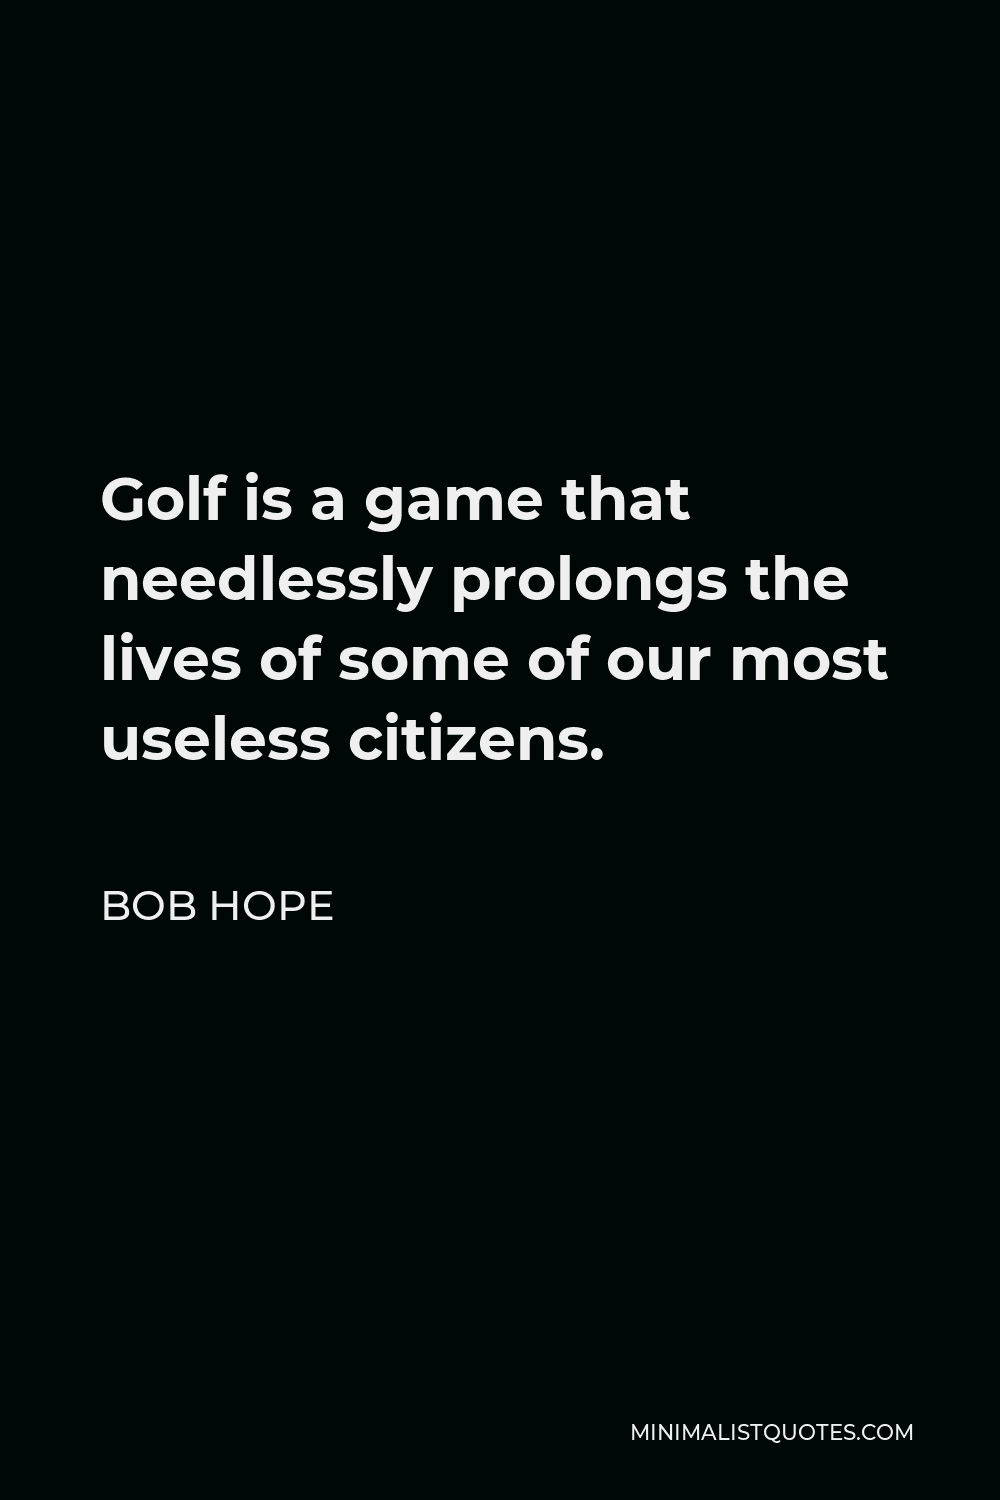 Bob Hope Quote - Golf is a game that needlessly prolongs the lives of some of our most useless citizens.